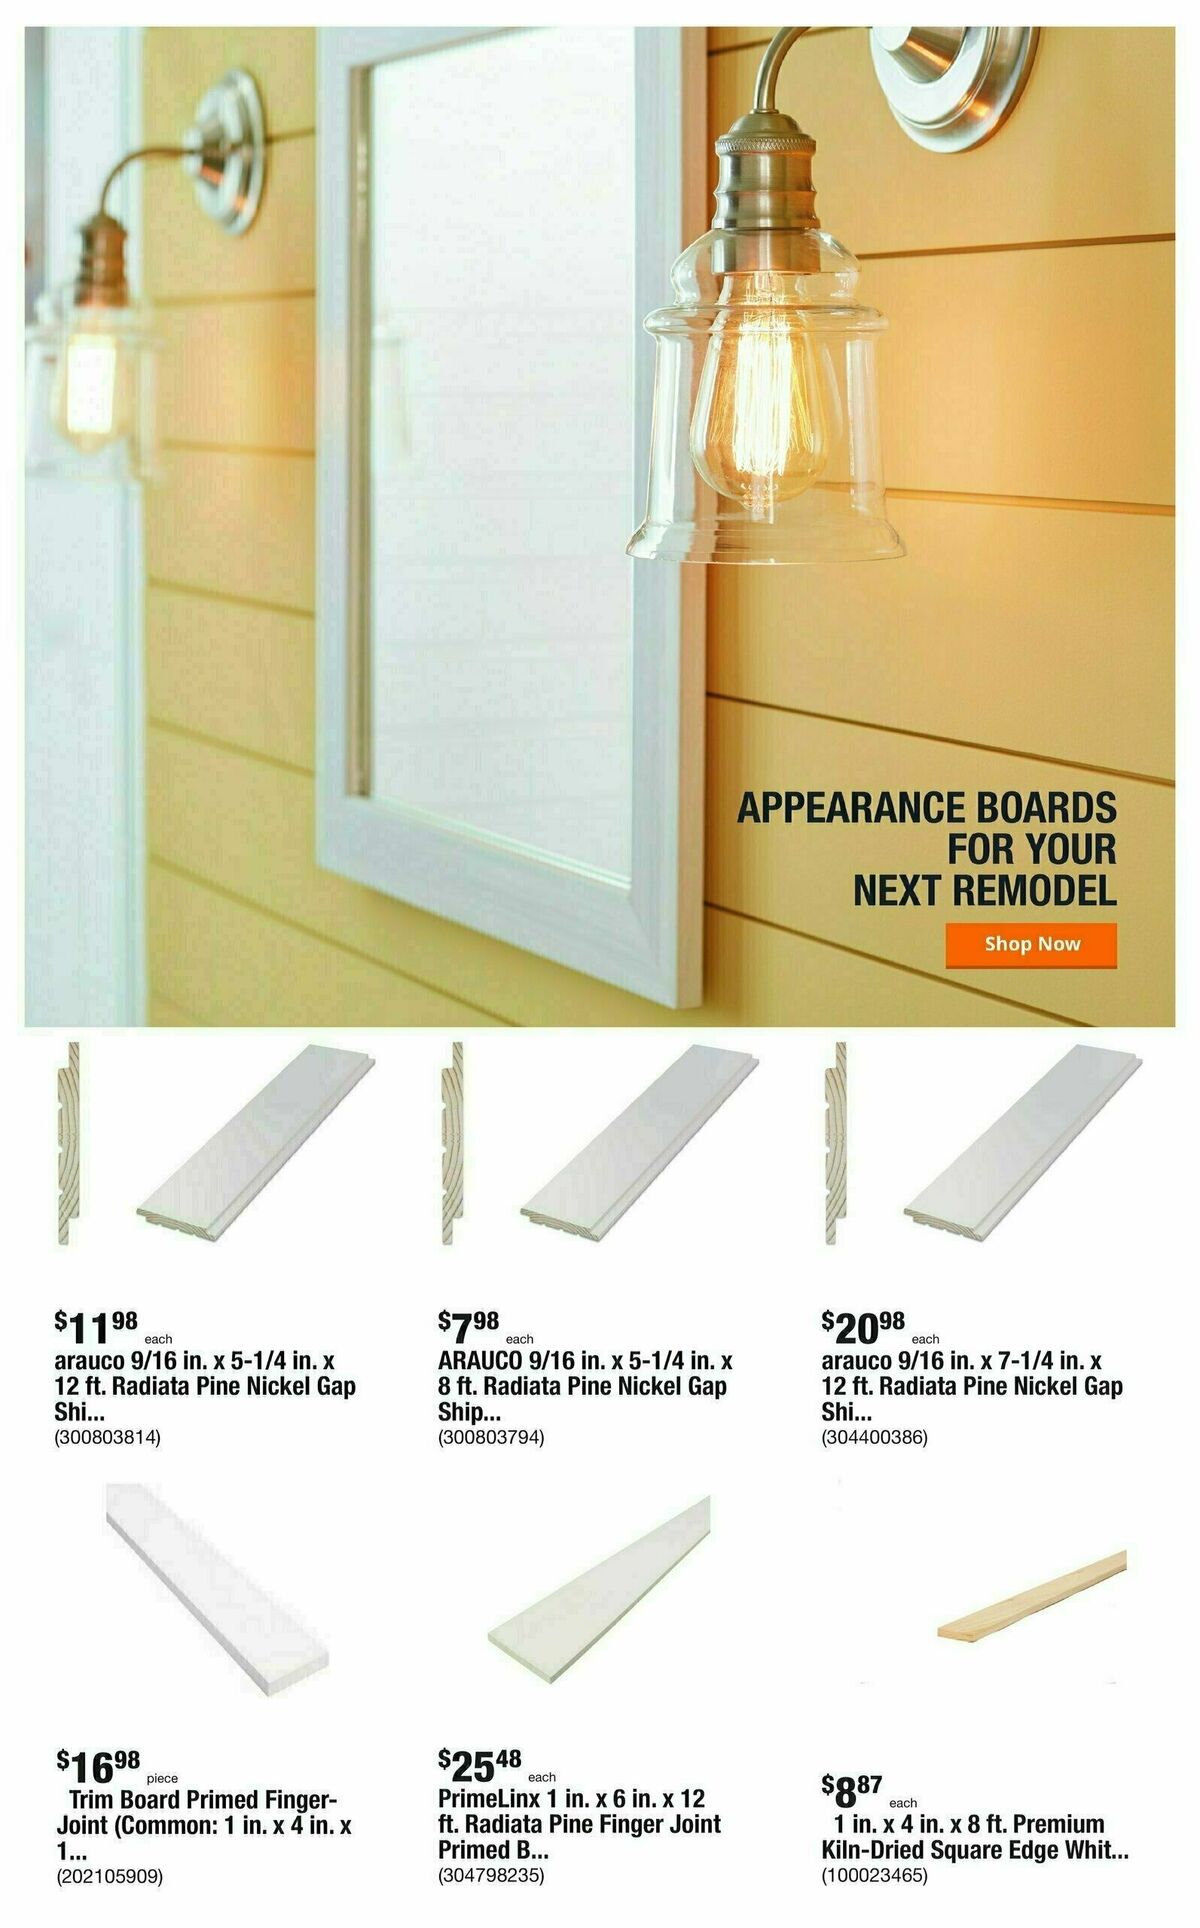 The Home Depot Pro Weekly Ad from January 22